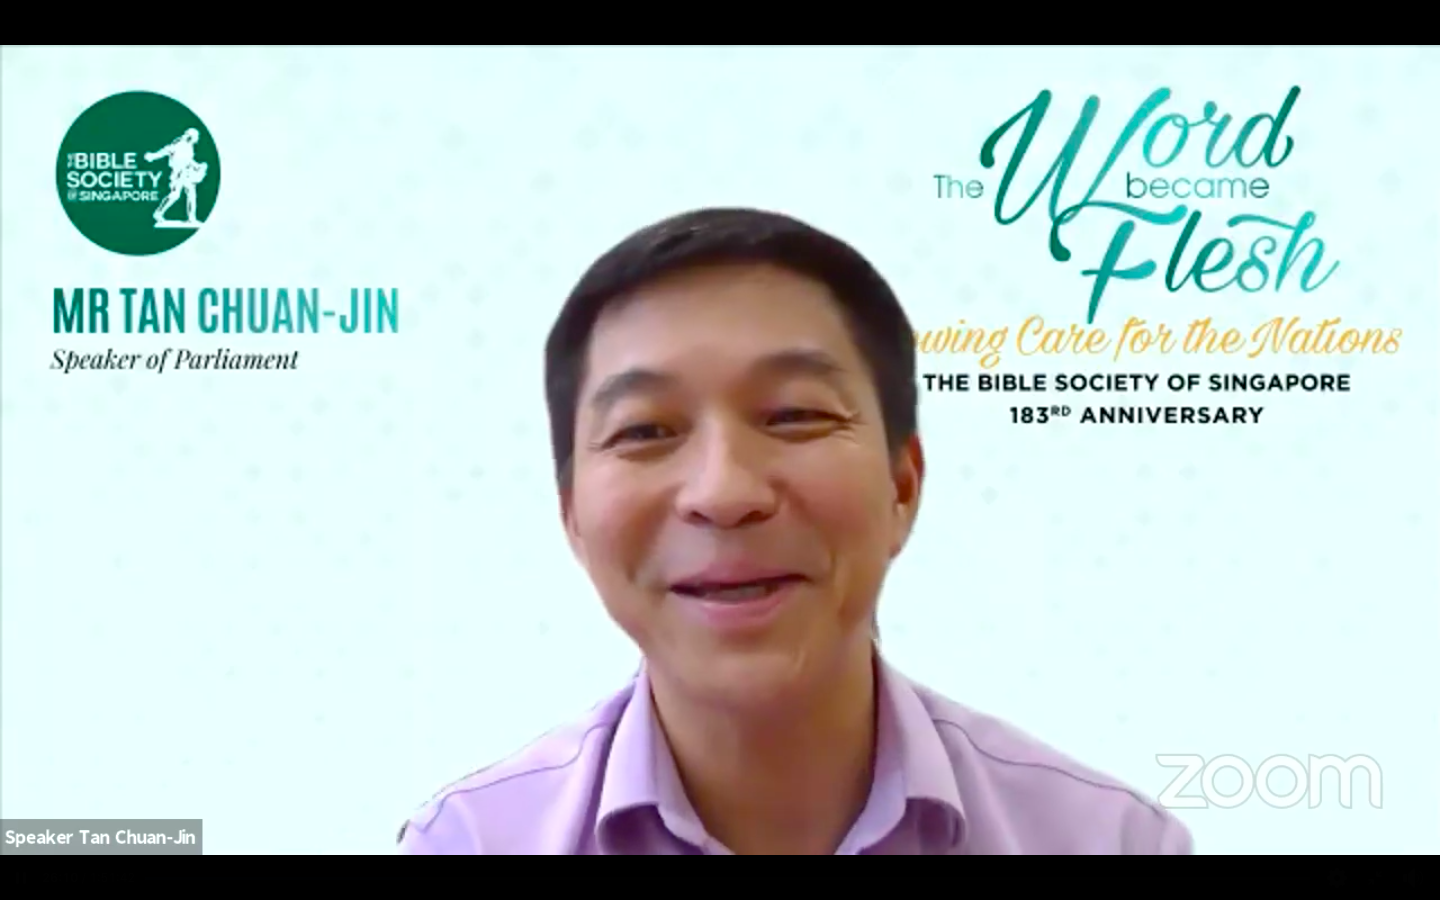 "We need to be clear of our own faith – what is it we believe in and how grounded we are," said Mr Tan to over 470 pastors and Christian leaders at the 183rd anniversary of the Bible Society of Singapore. (Screenshot from the Bible Society of Singapore event.)